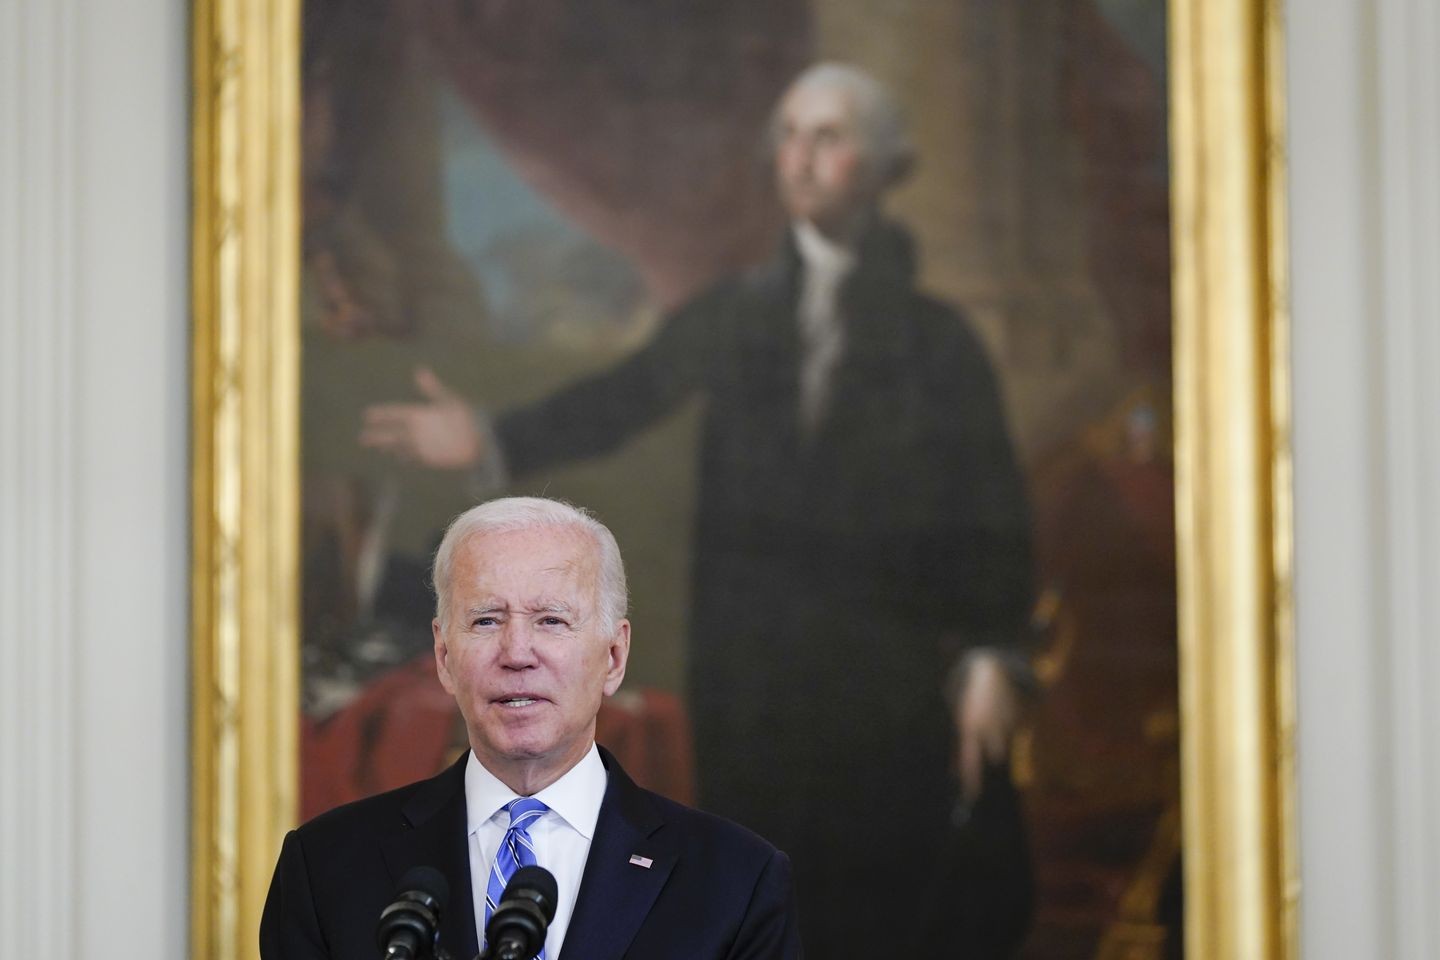 Biden to sign take executive action to protect Abortion access: Report